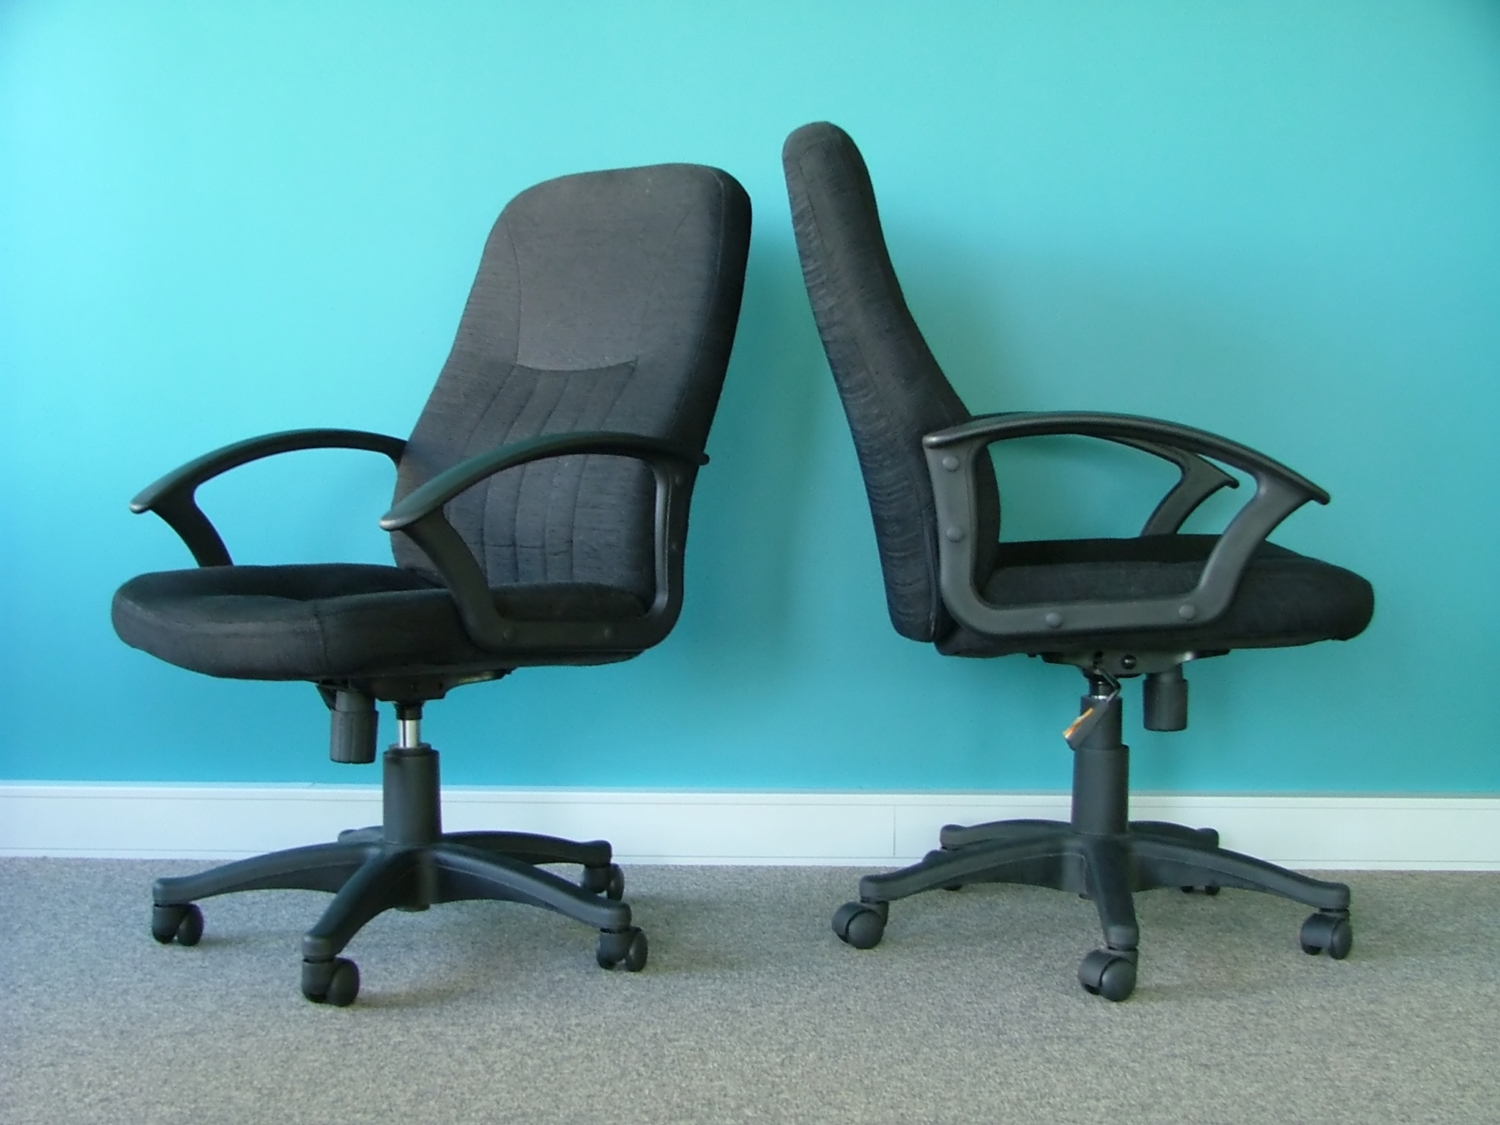 Support Your Spinal Health by Choosing the Right Office Chair